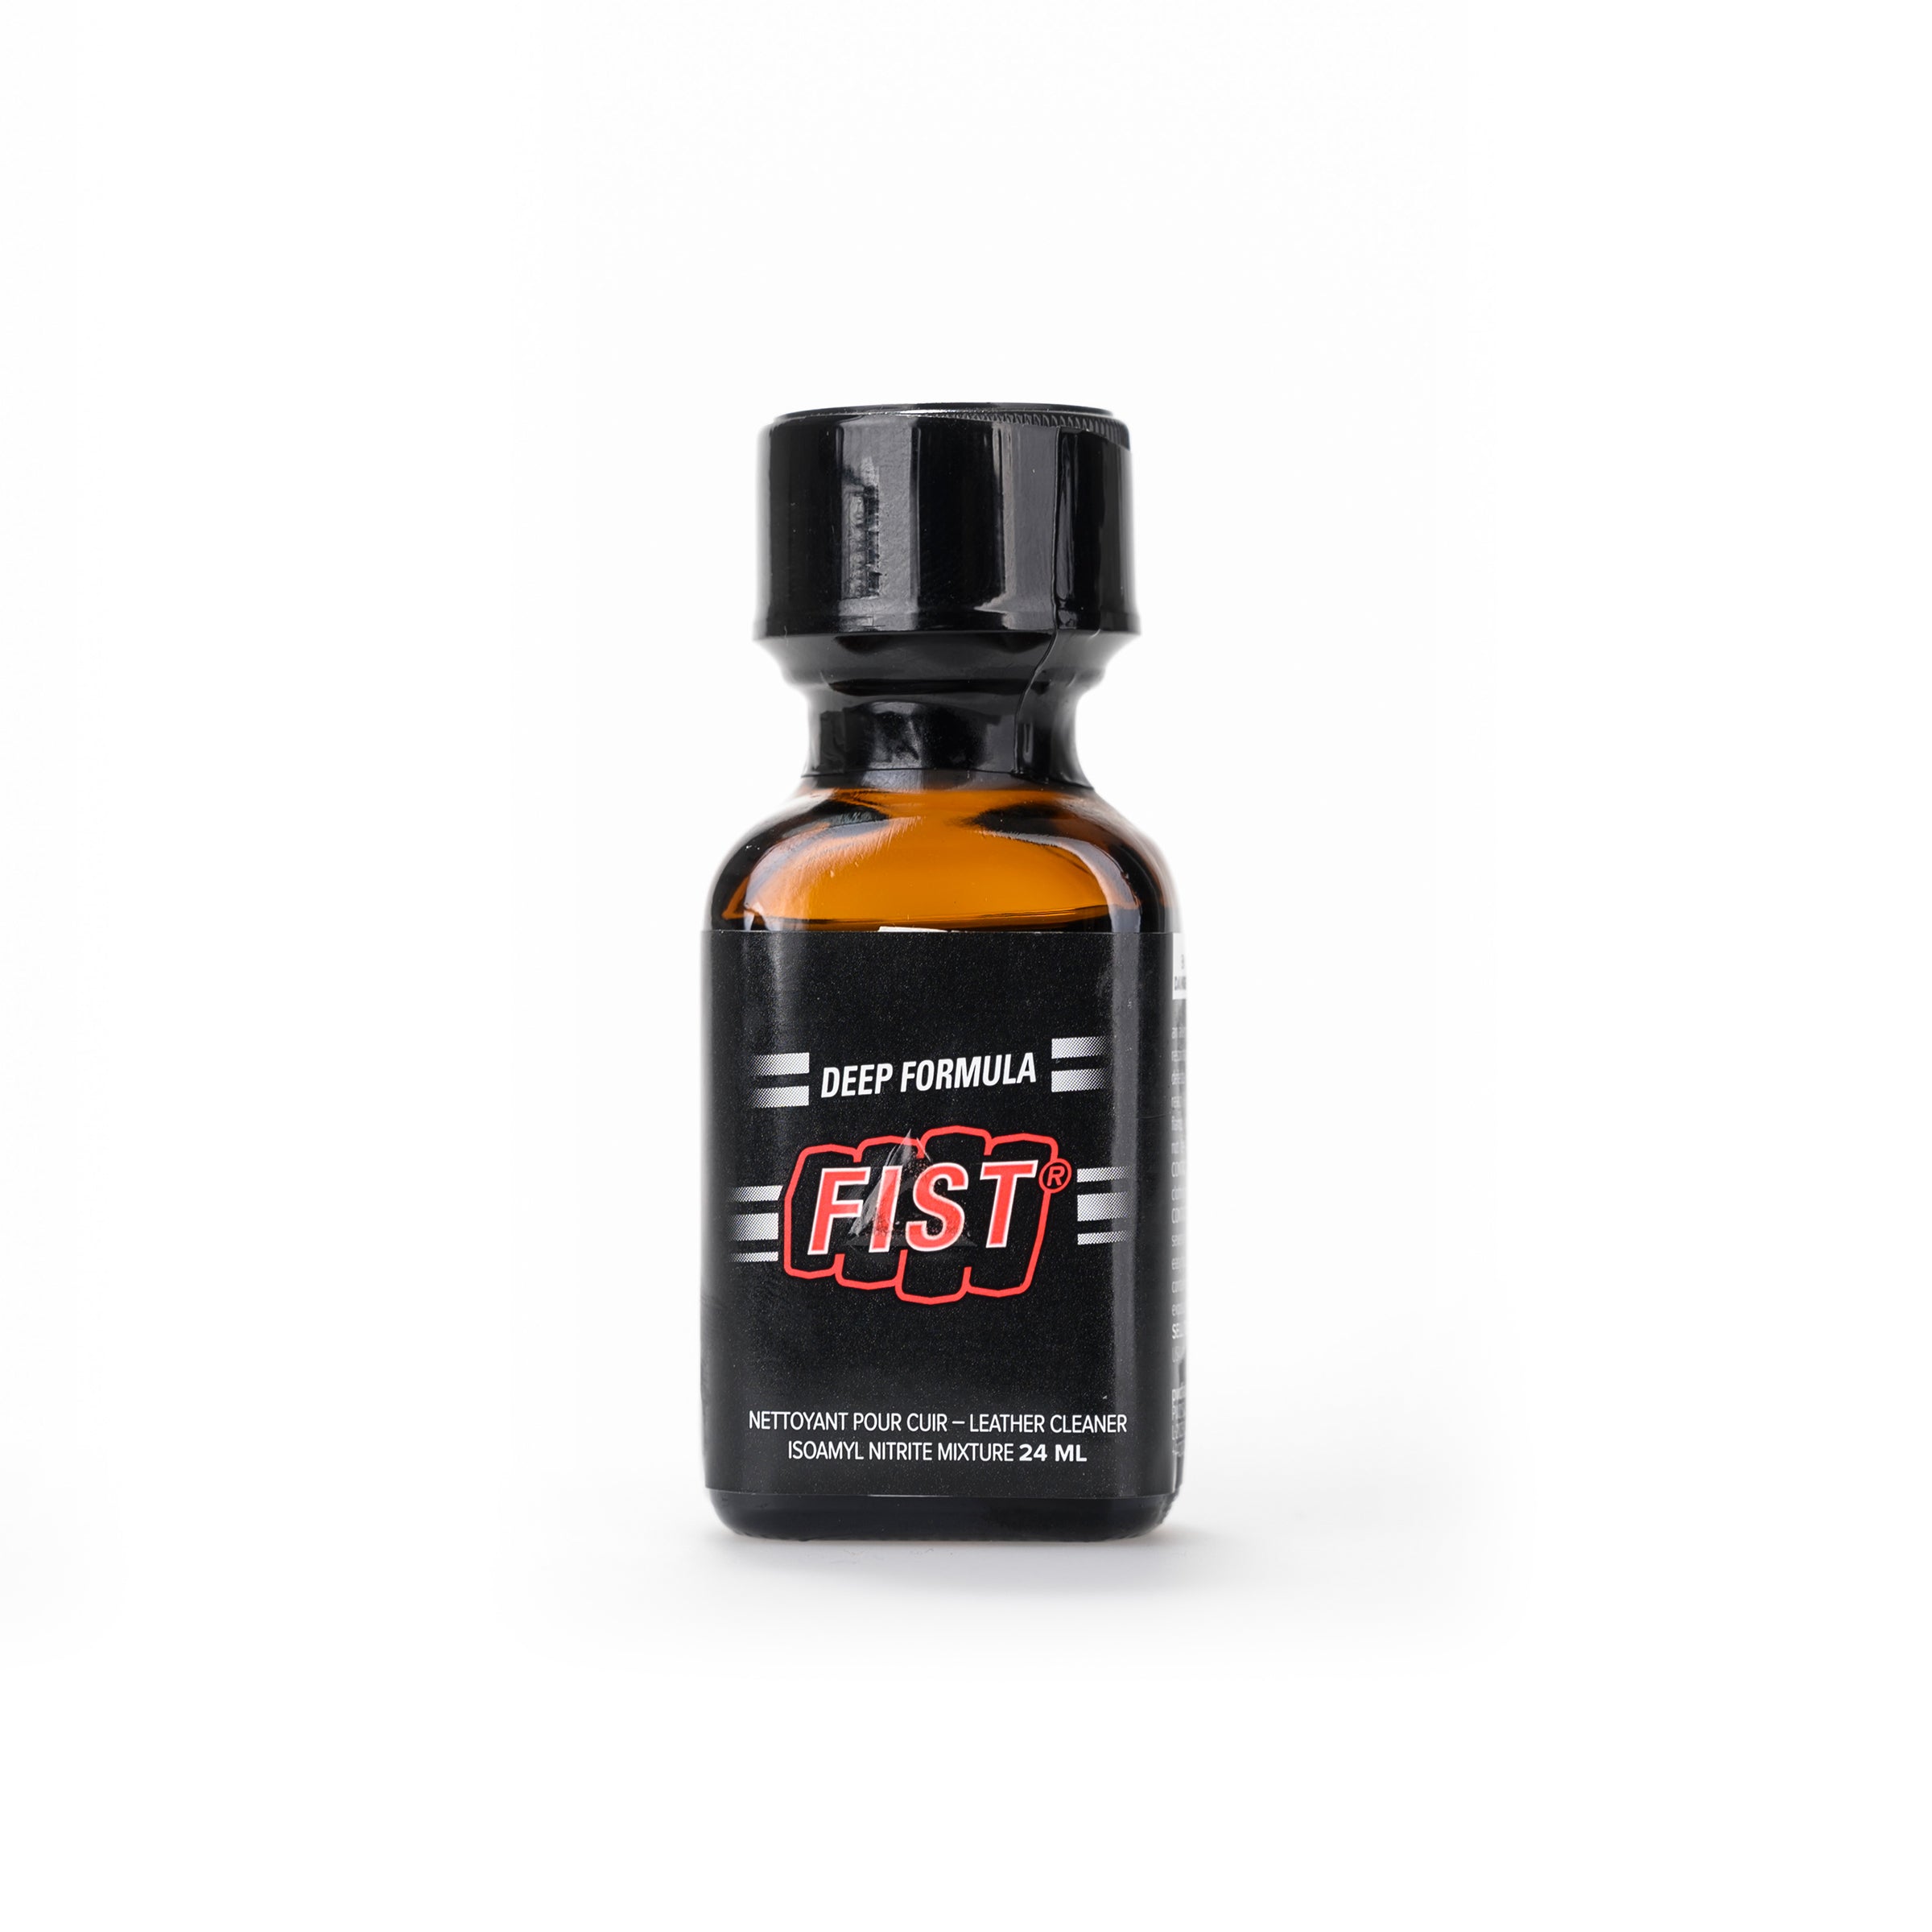 A product photo of a bottle of Fist Deep Poppers.